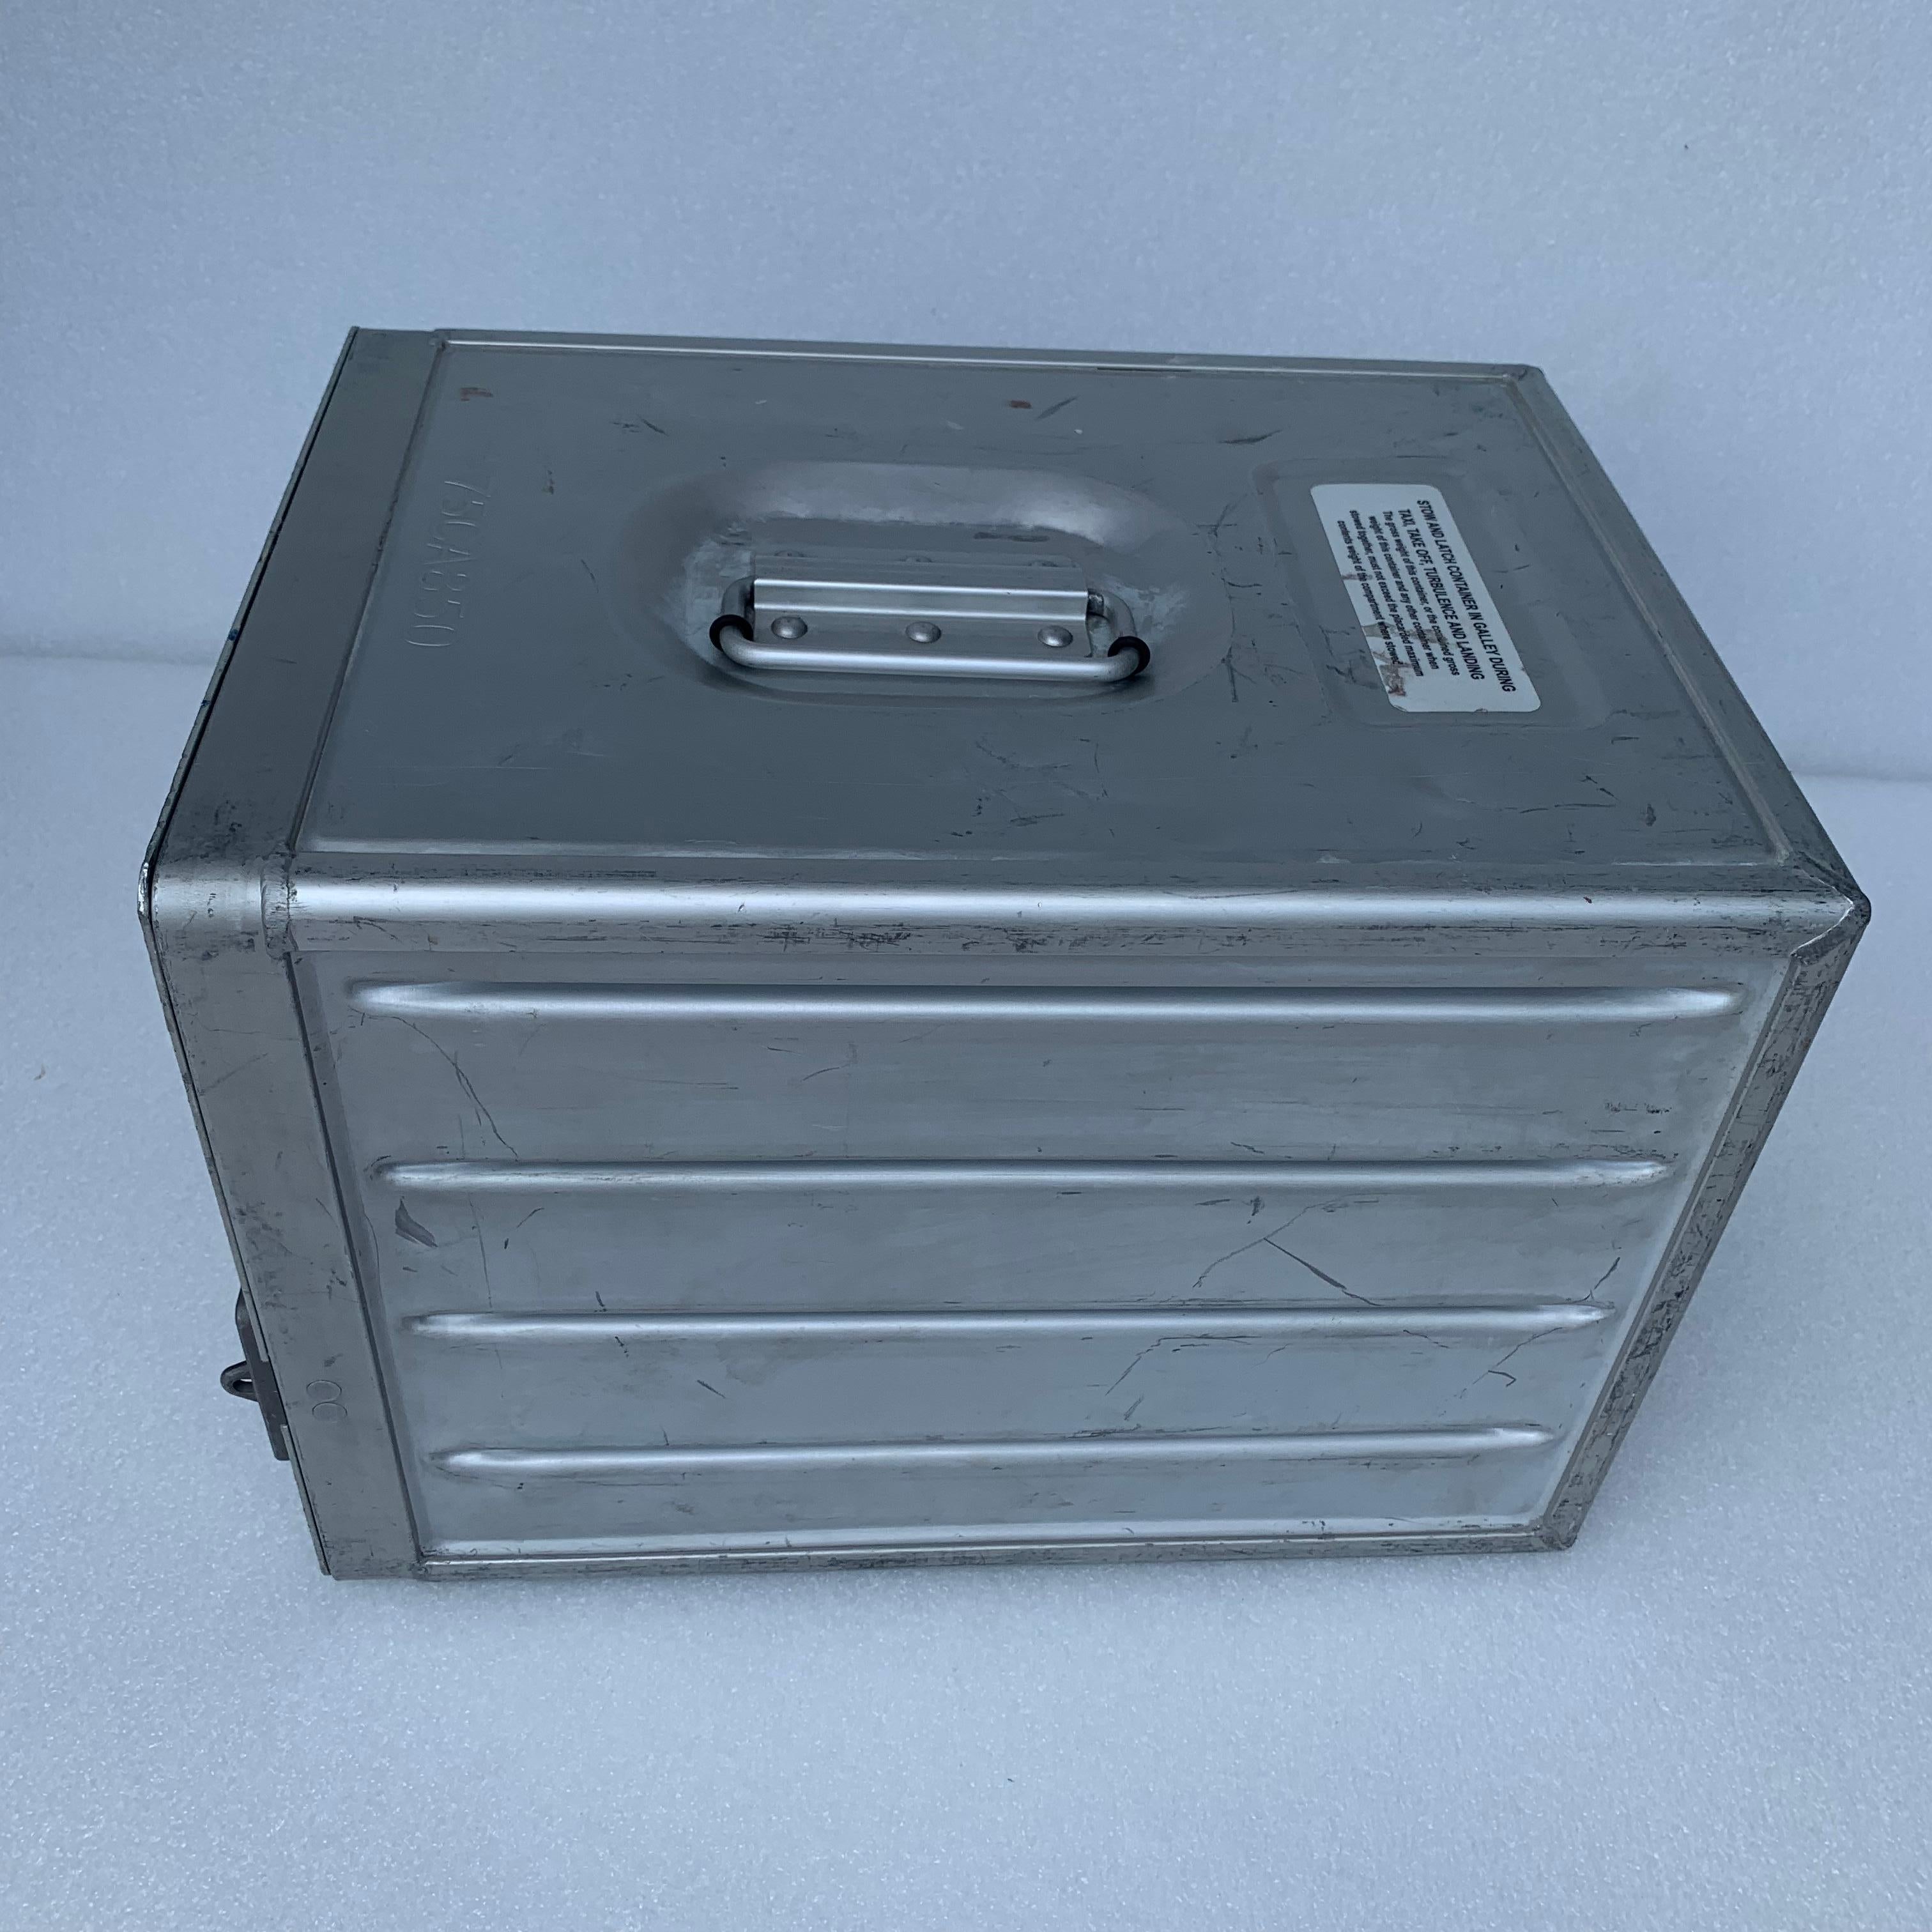 Vintage American Airlines Aluminum Catering Galley Container Box 8